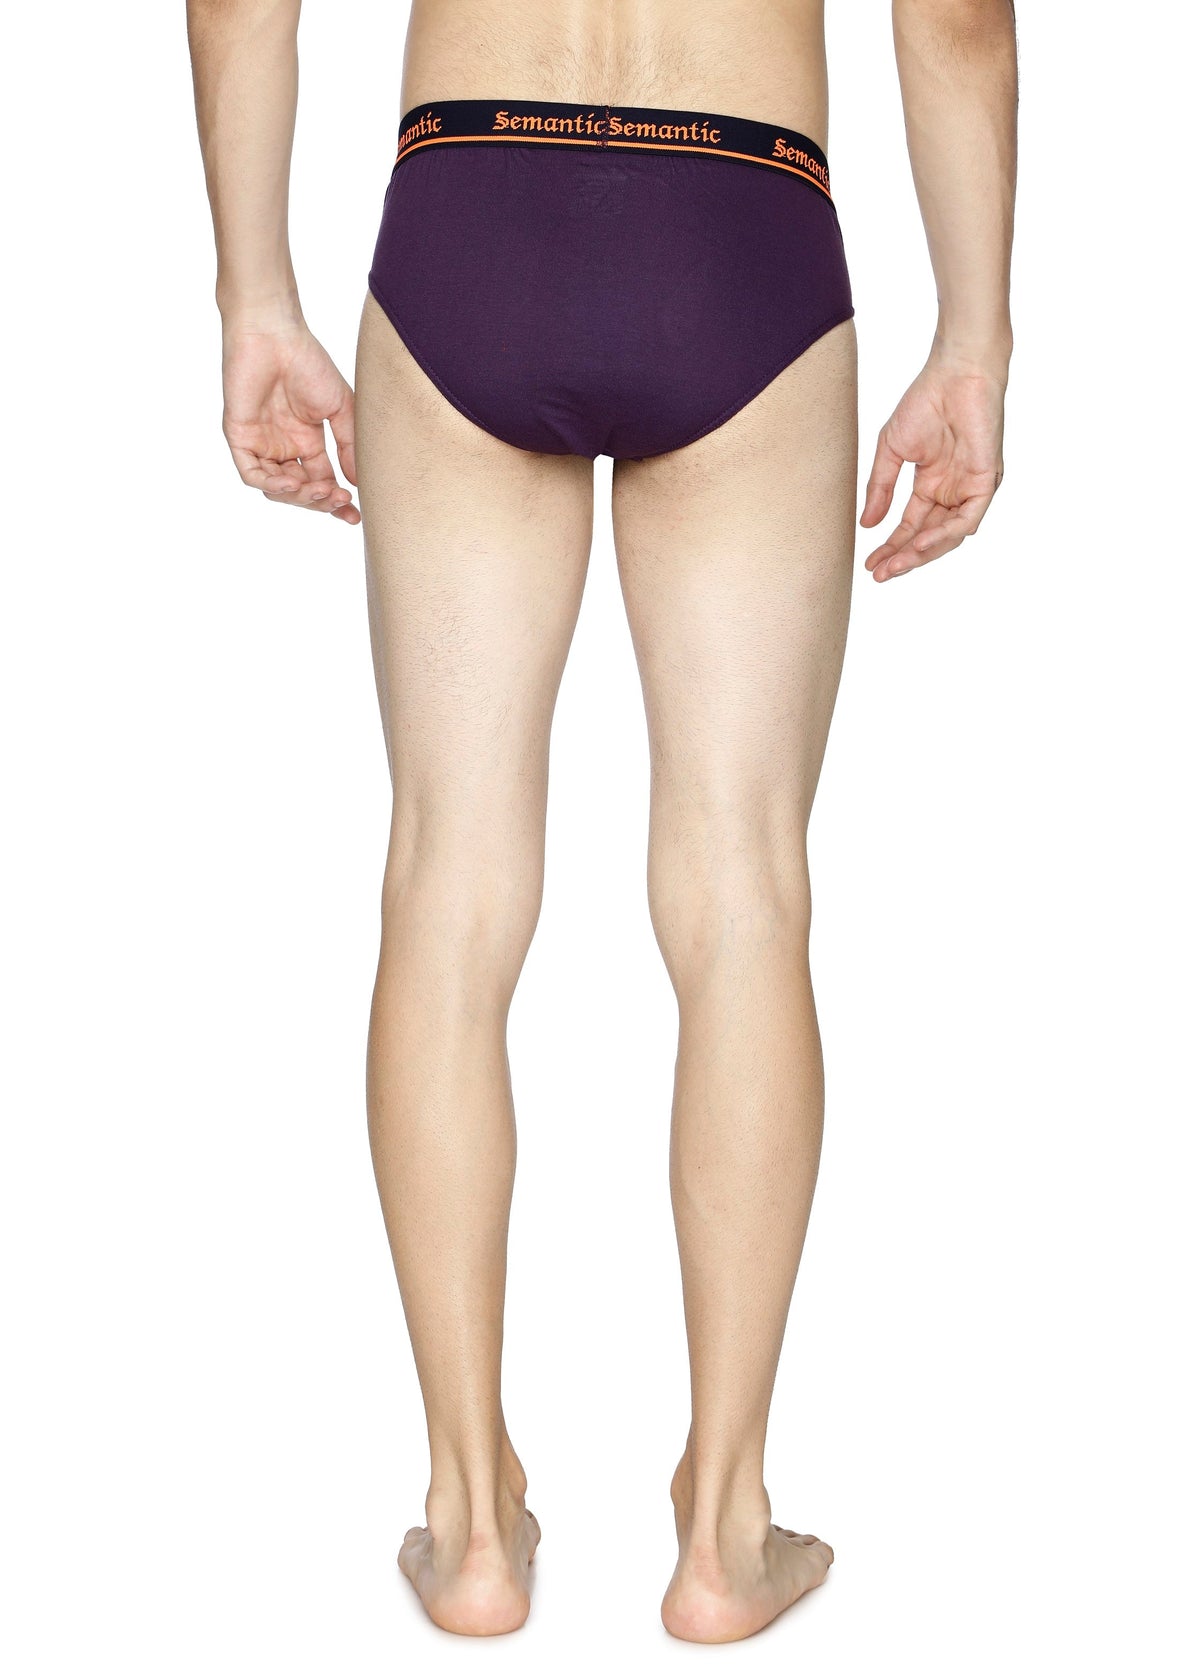 Semantic Cotton Briefs - Inner Waistband - Solid at Rs 189.00